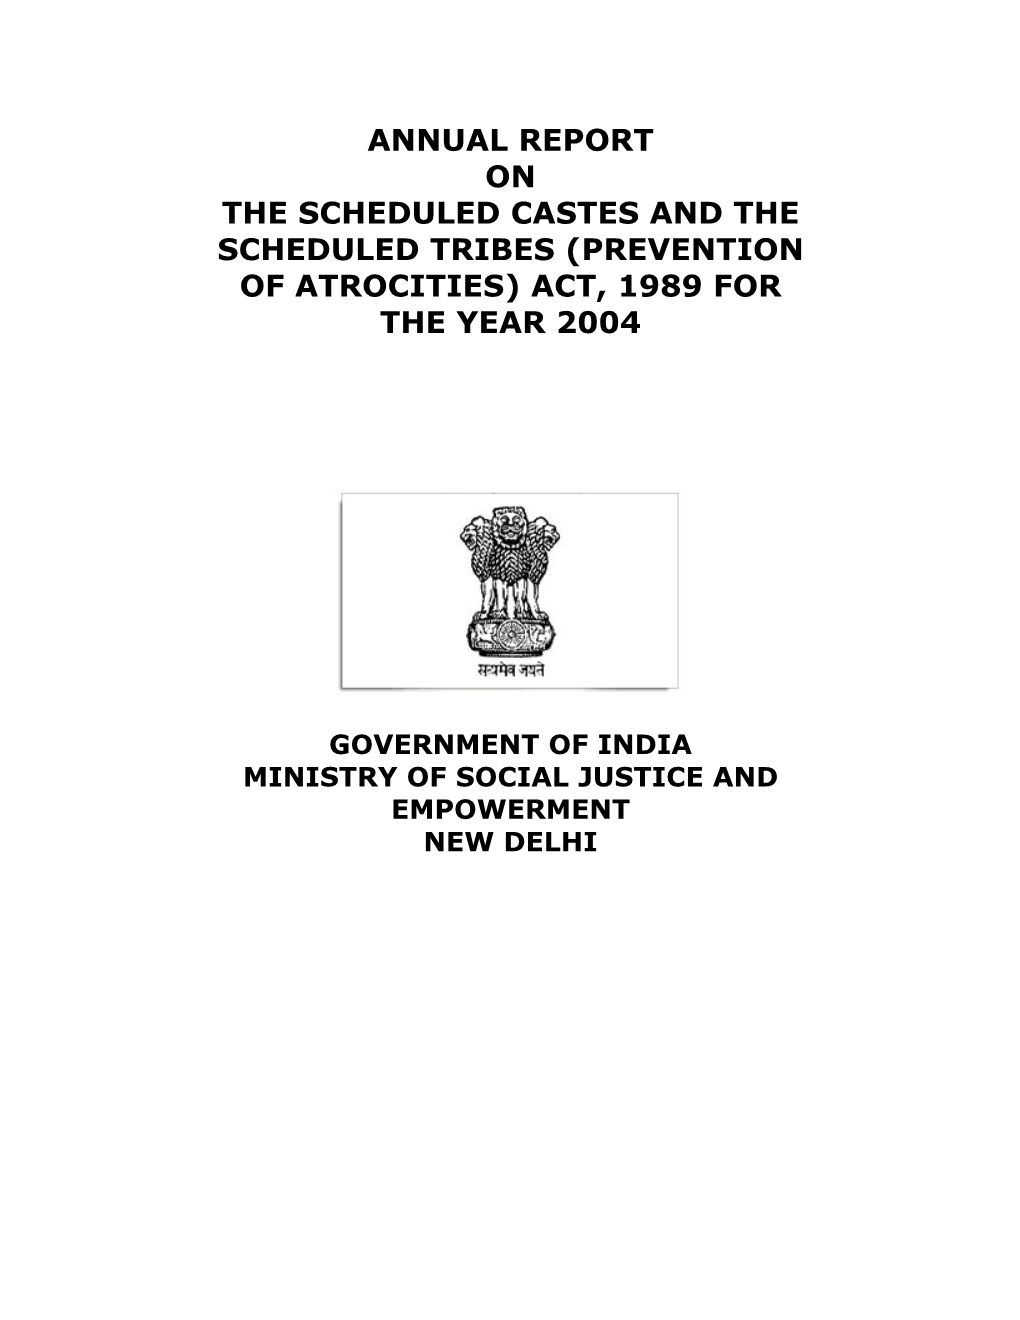 Annual Report on the Scheduled Castes and the Scheduled Tribes (Prevention of Atrocities) Act, 1989 for the Year 2004